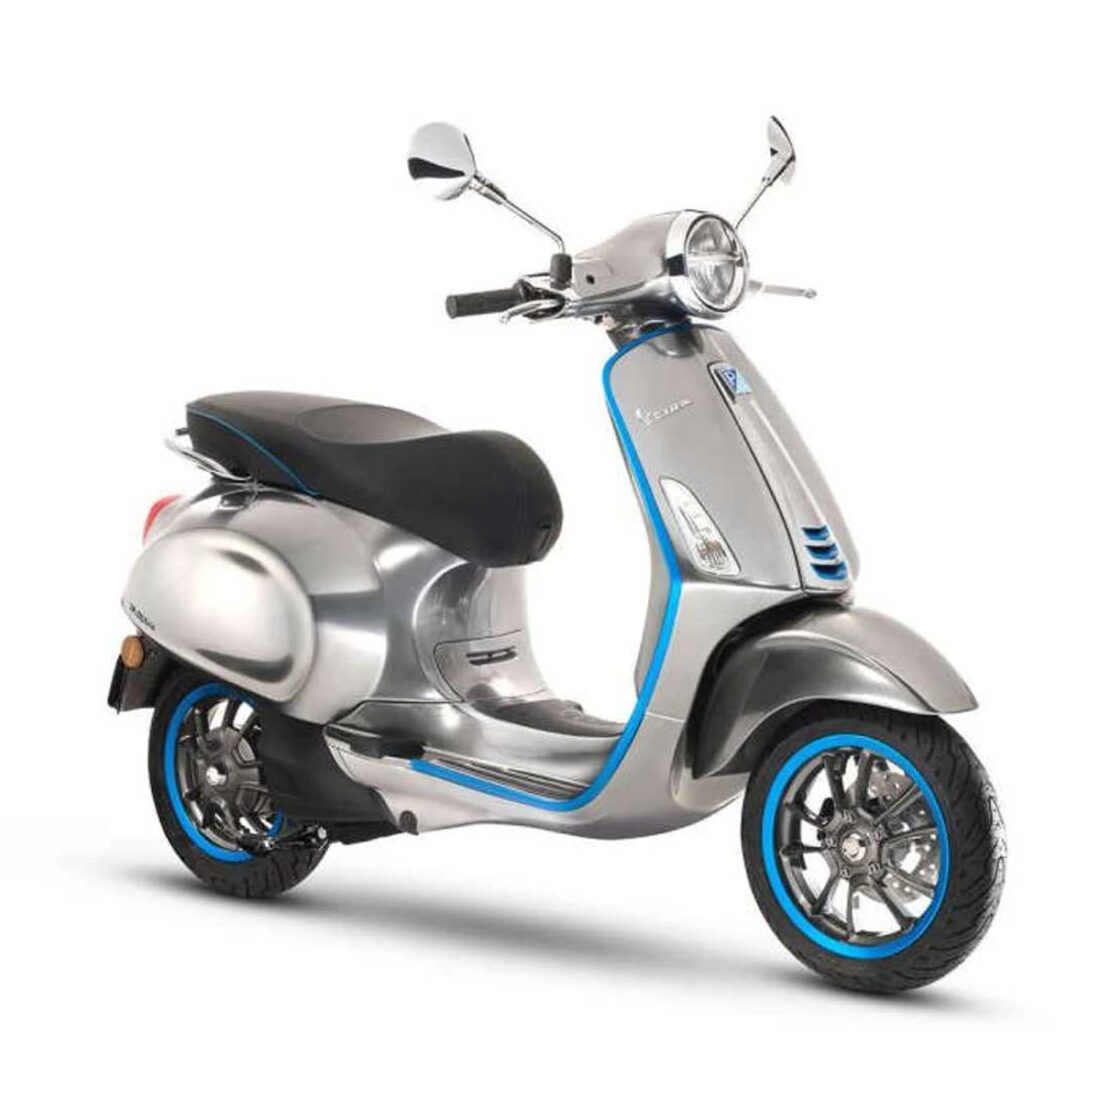 Aprilla eSR1: new scooter inspired by the electric Vespa?